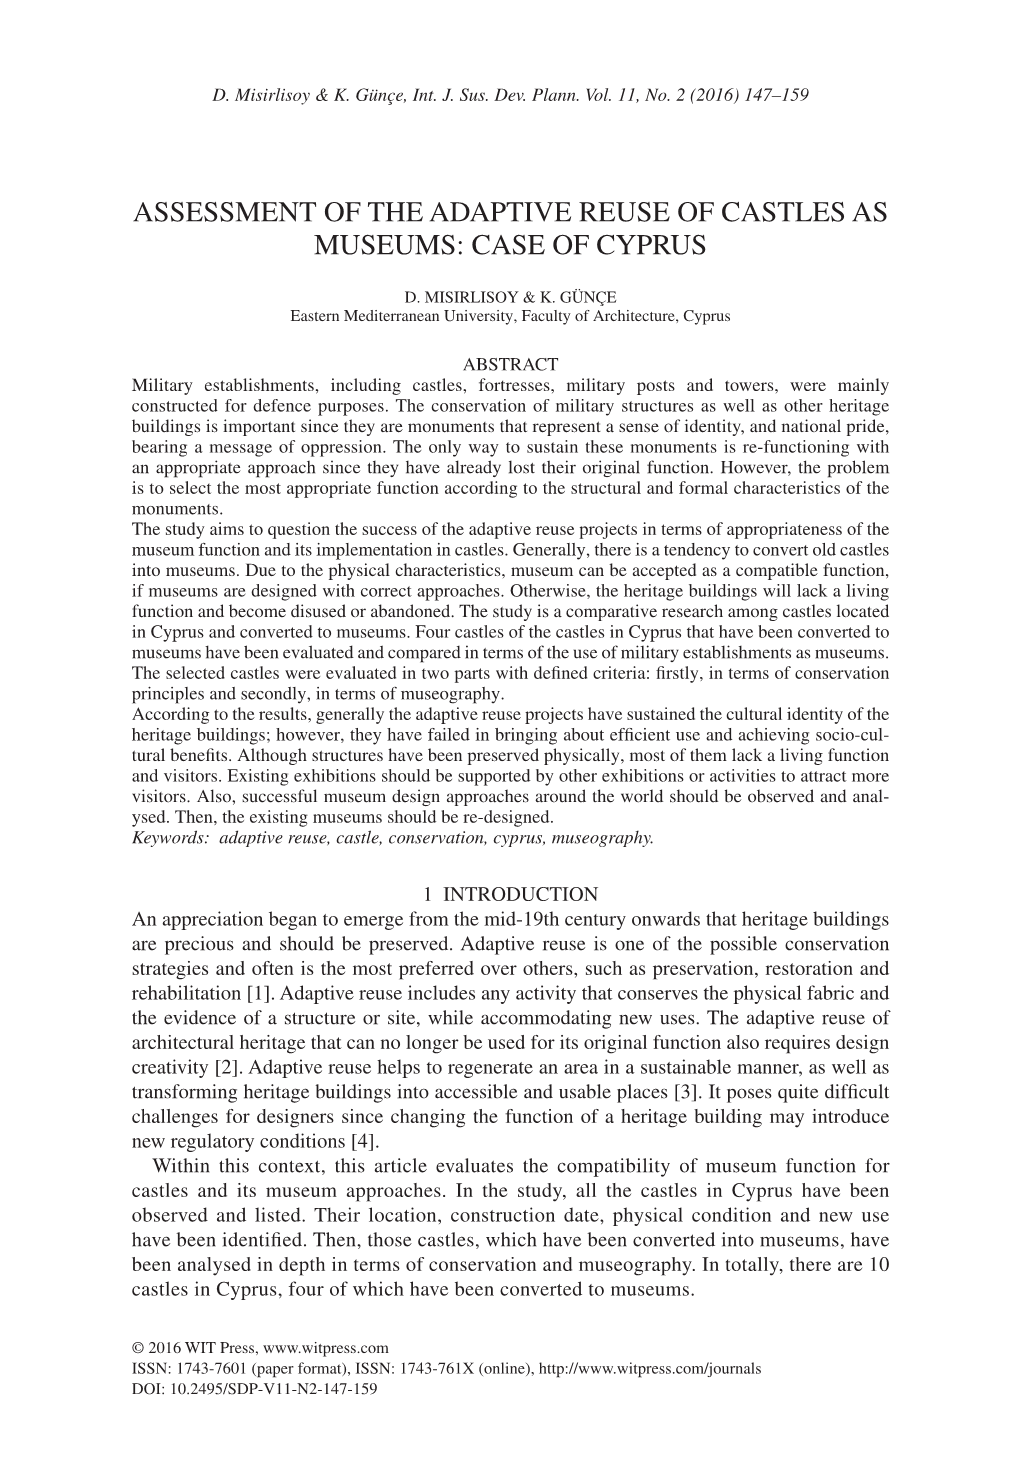 Assessment of the Adaptive Reuse of Castles As Museums: Case of Cyprus